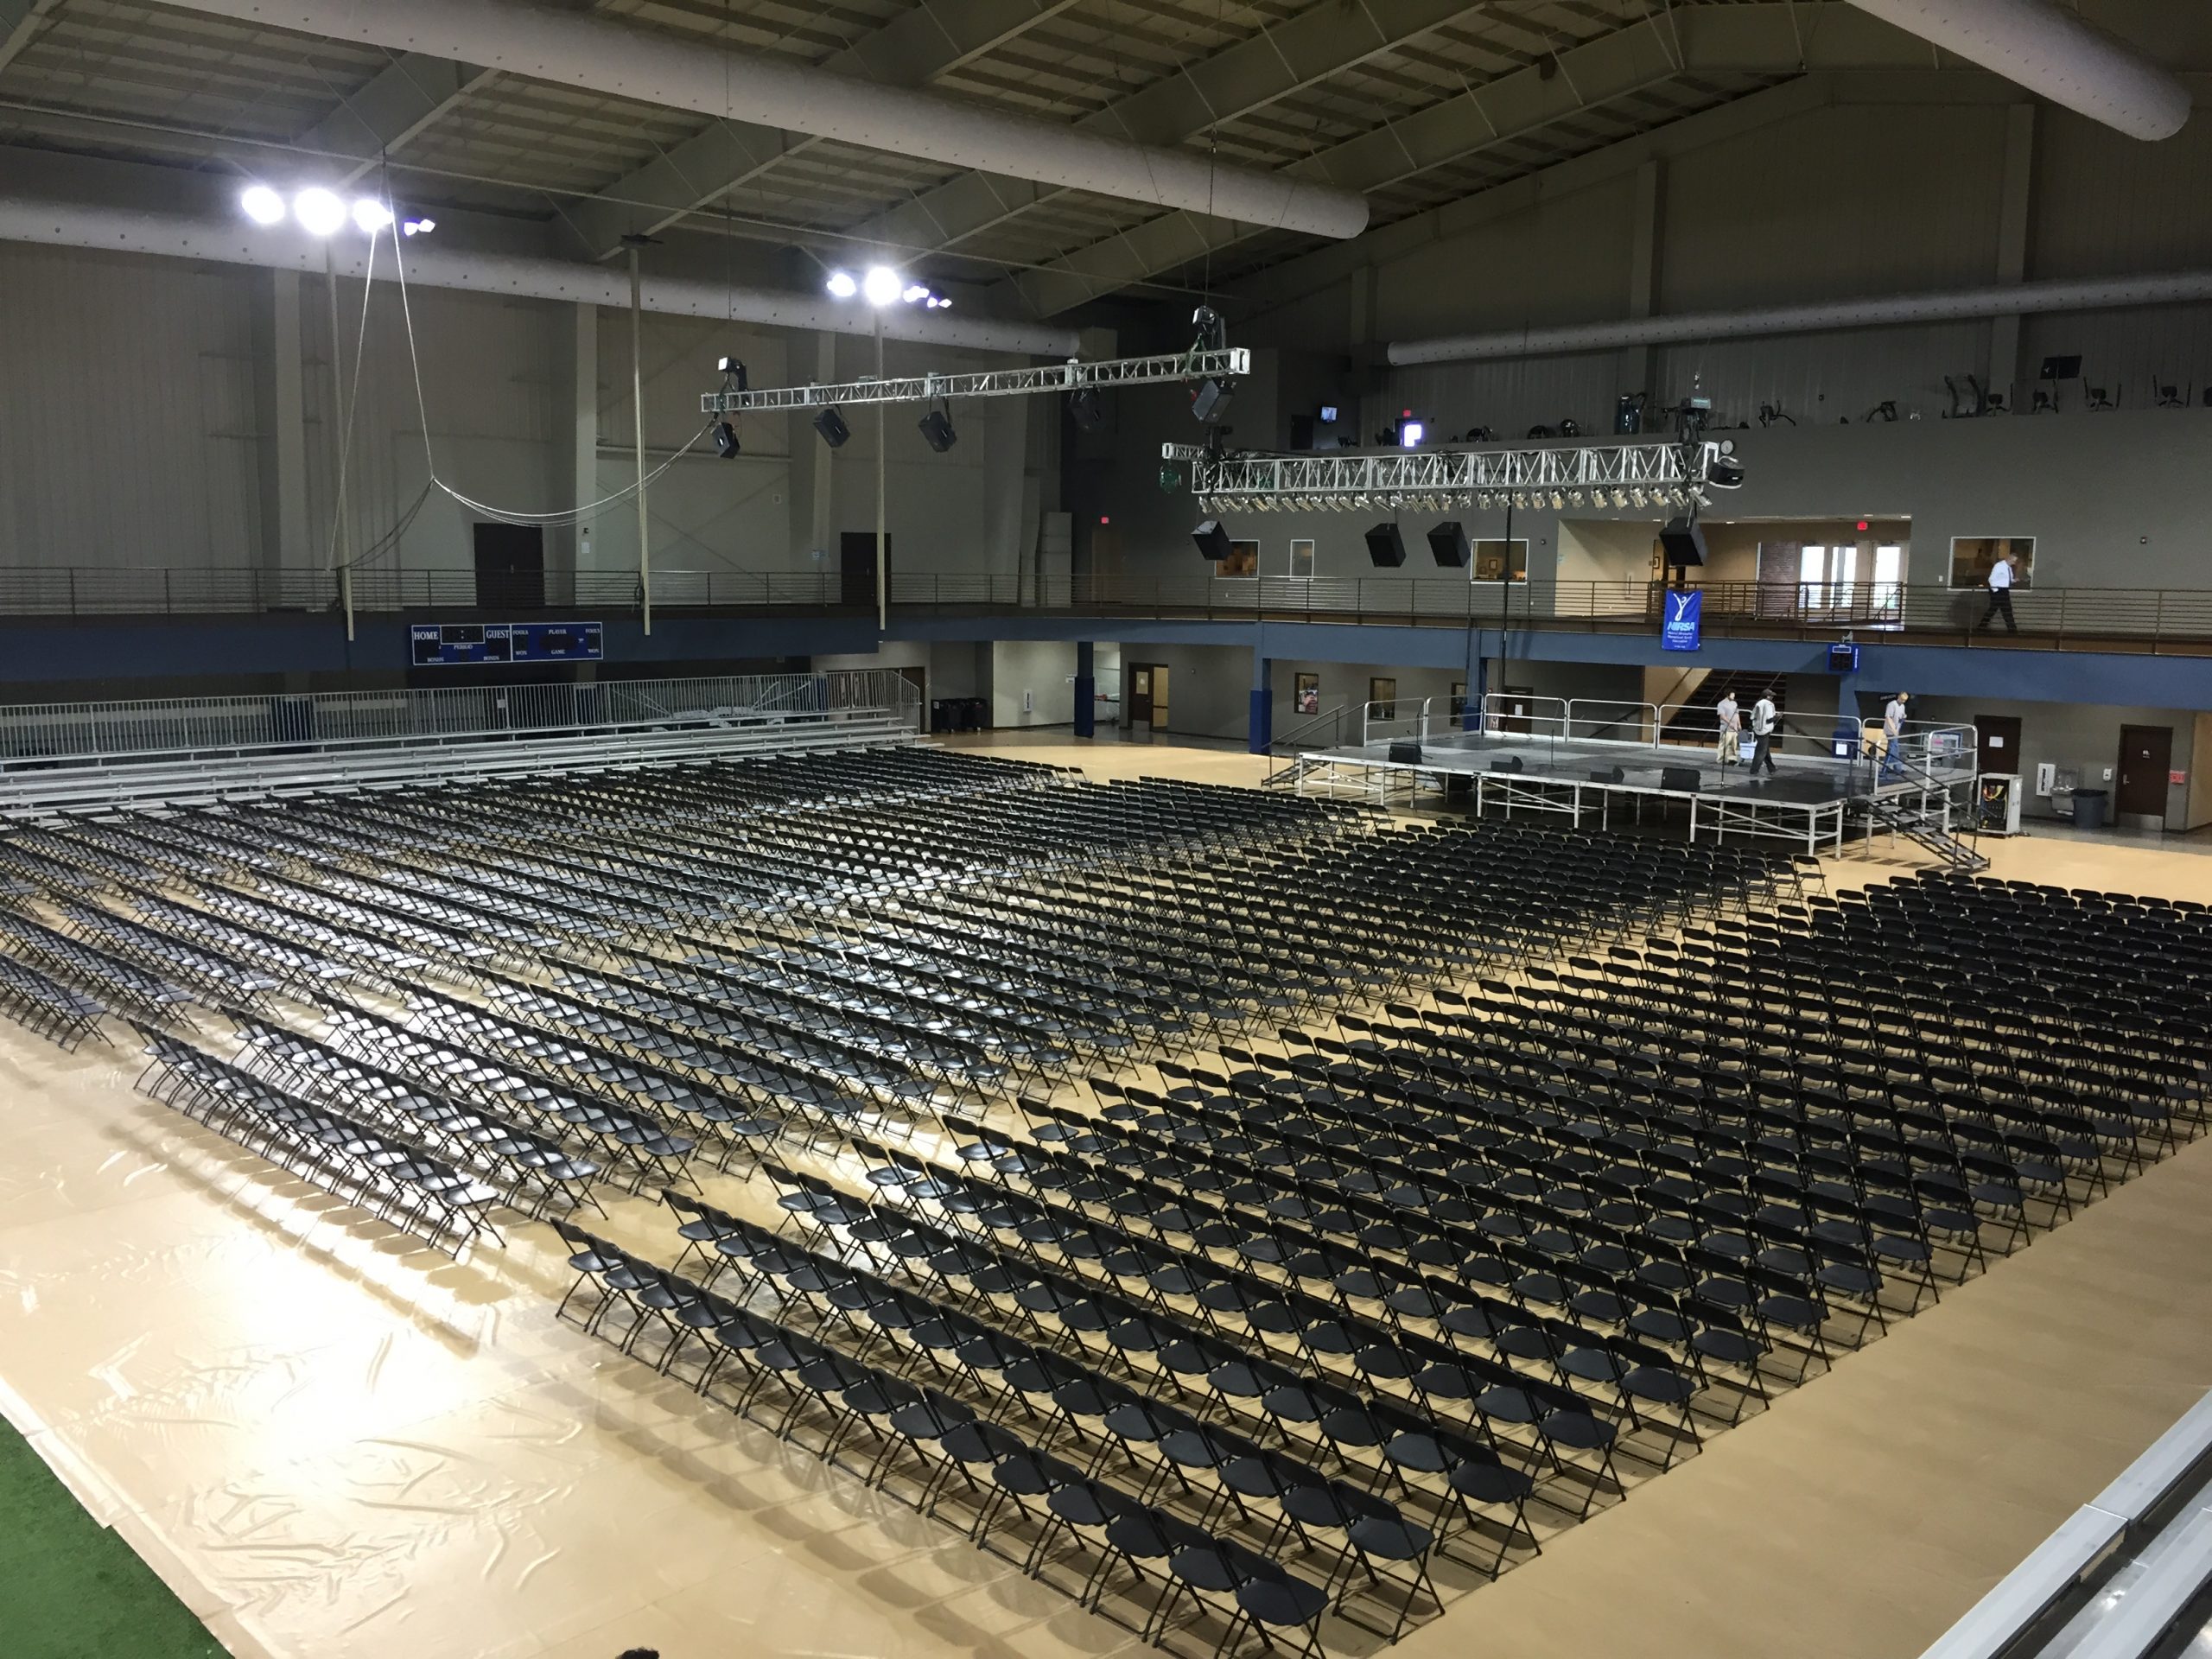 Chairs and stage set-up for graduation at William Penn University